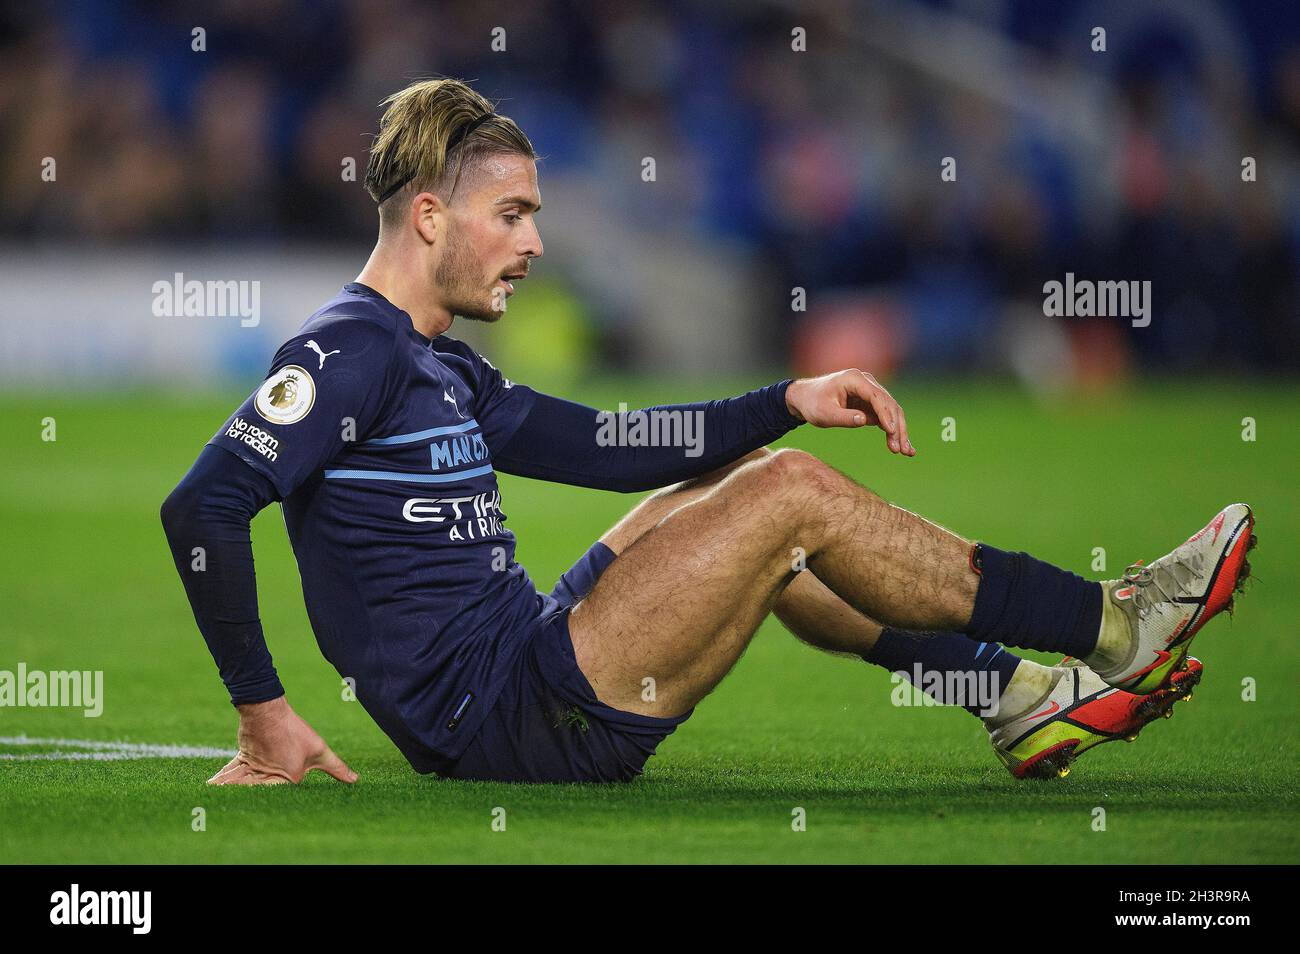 Manchester City's Jack Grealish during the game at the Amex Stadium, Brighton. Picture : Mark Pain / Alamy Stock Photo